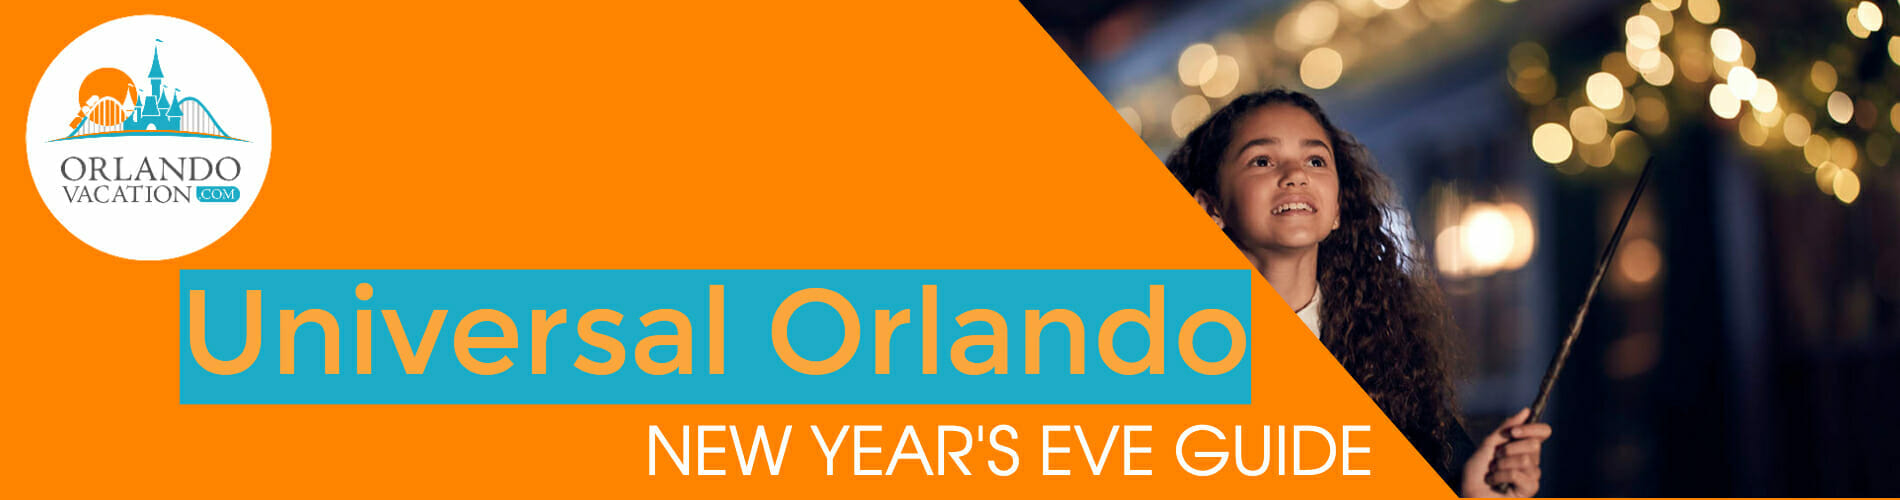 Universal Orlando New Year's Eve Guide